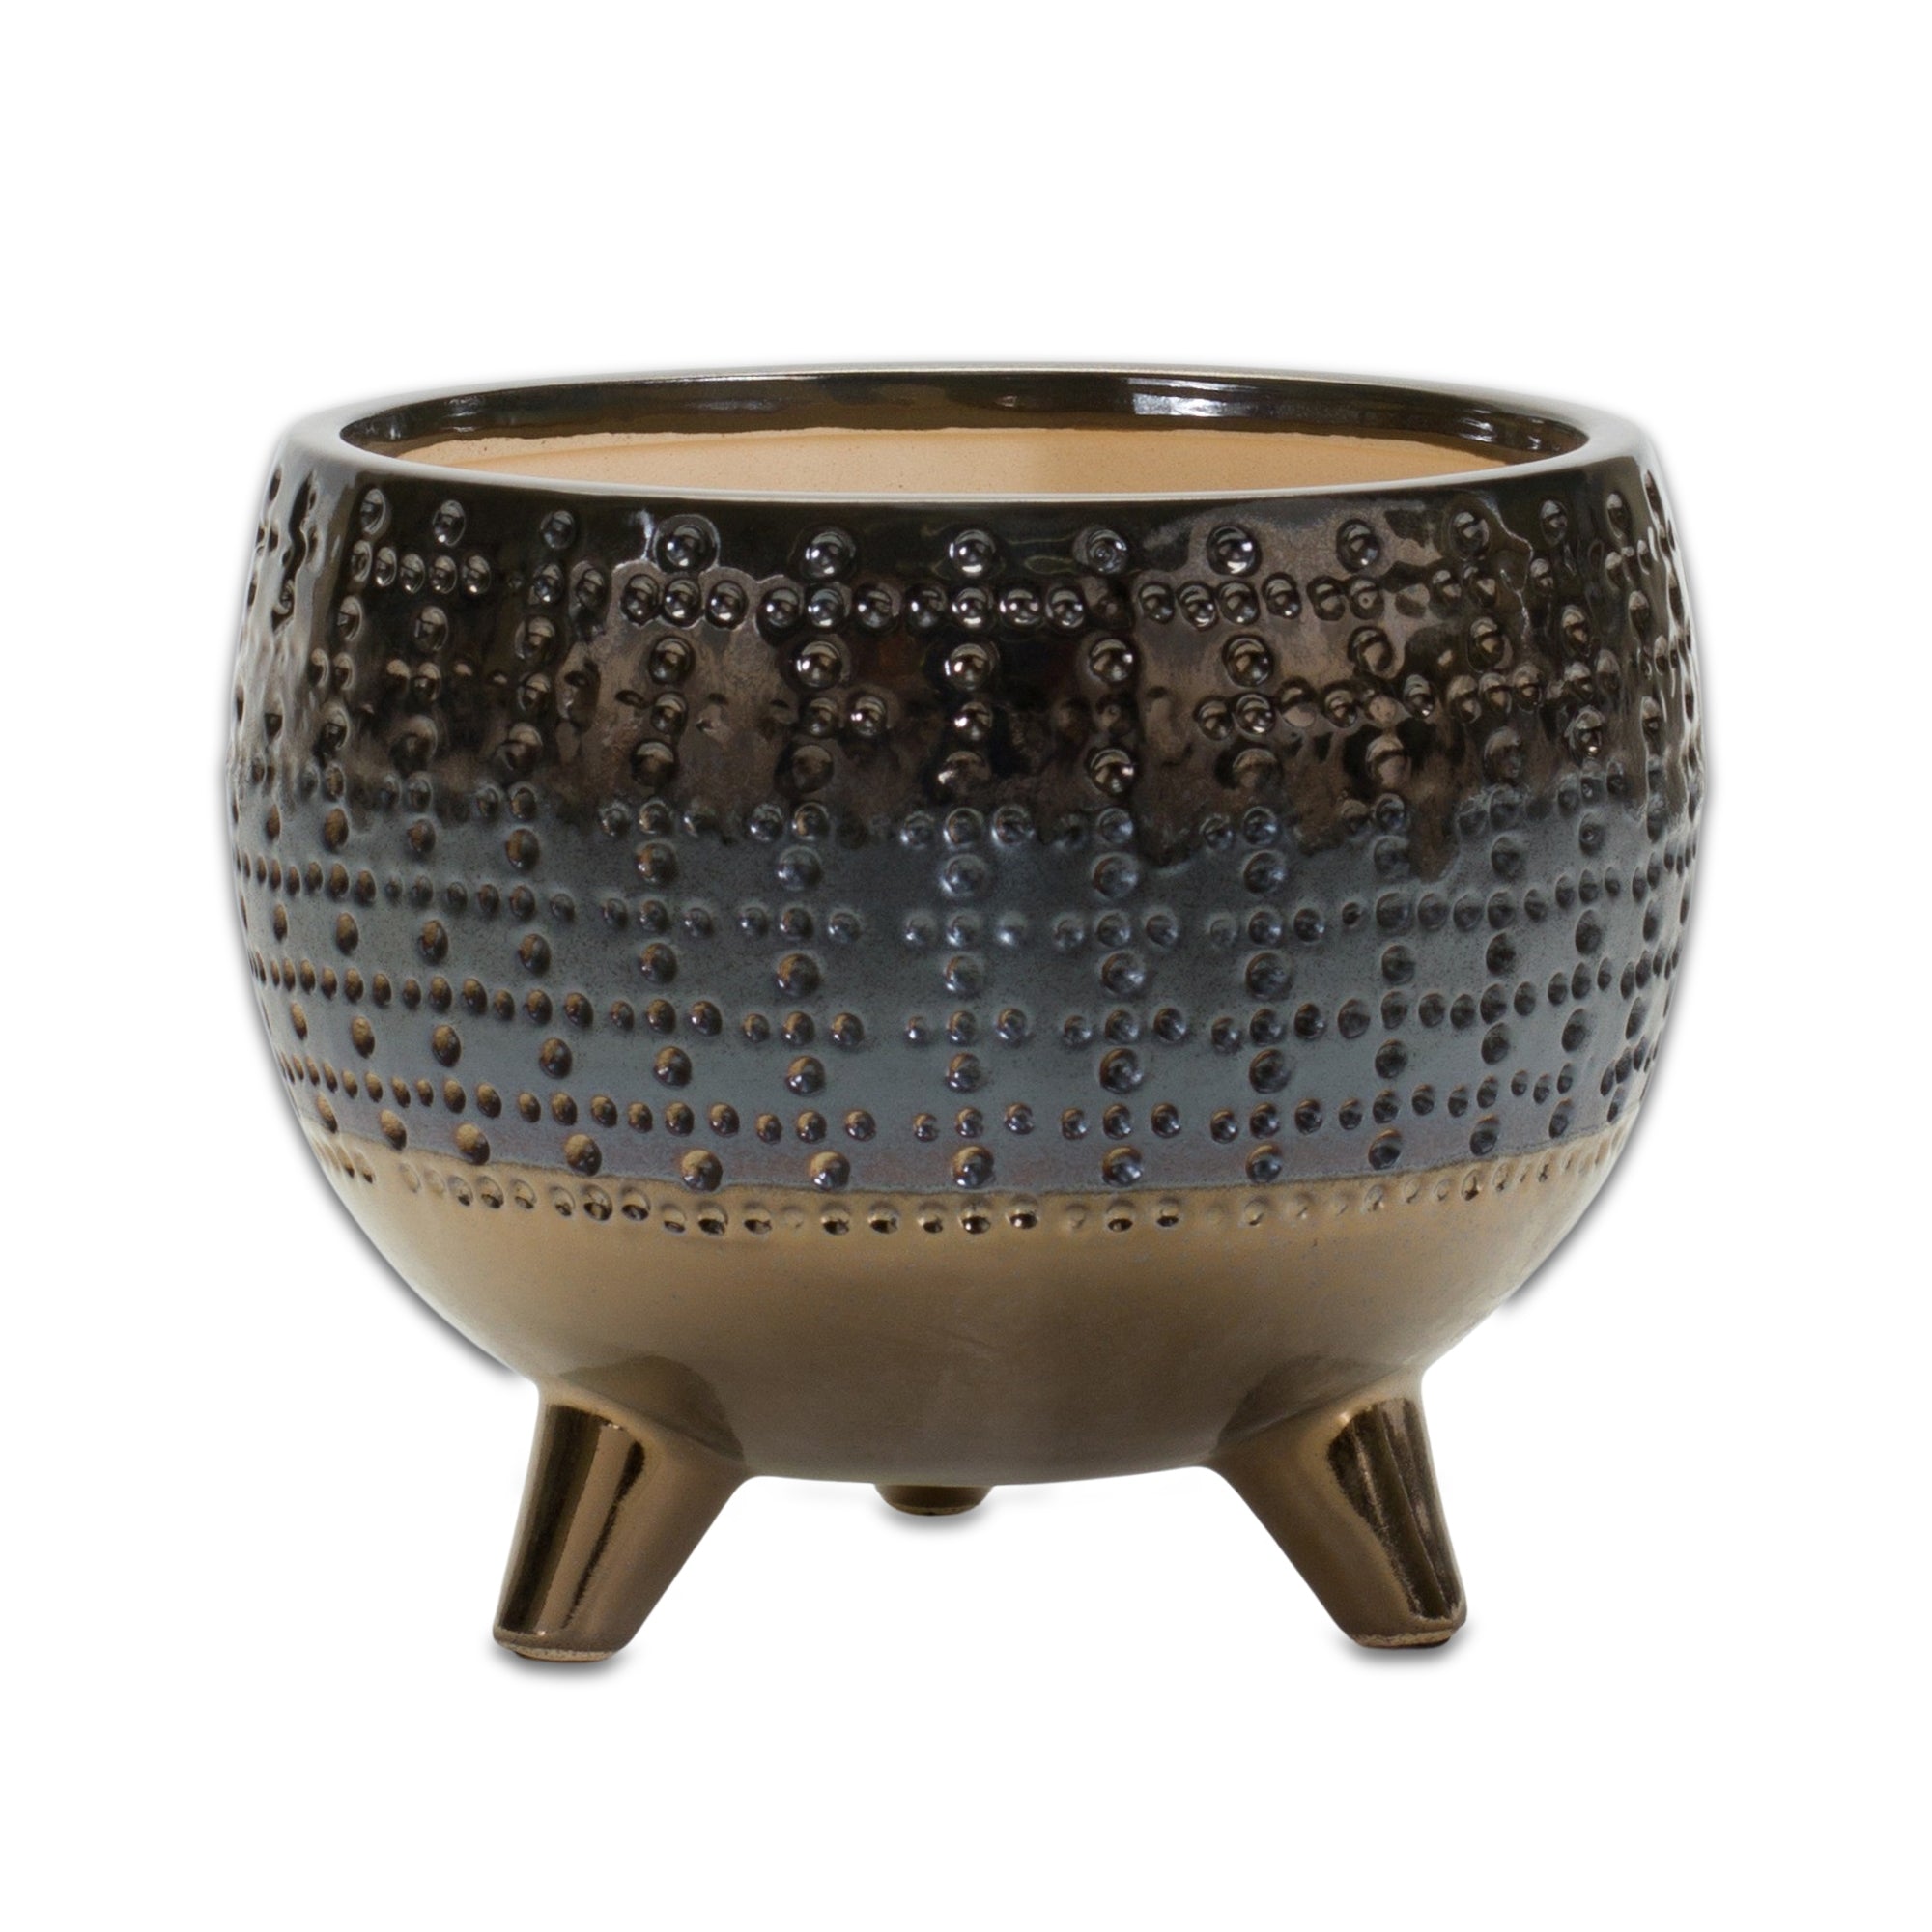 Dotted Ceramic Planter with Pewter Accent 6" - Pier 1